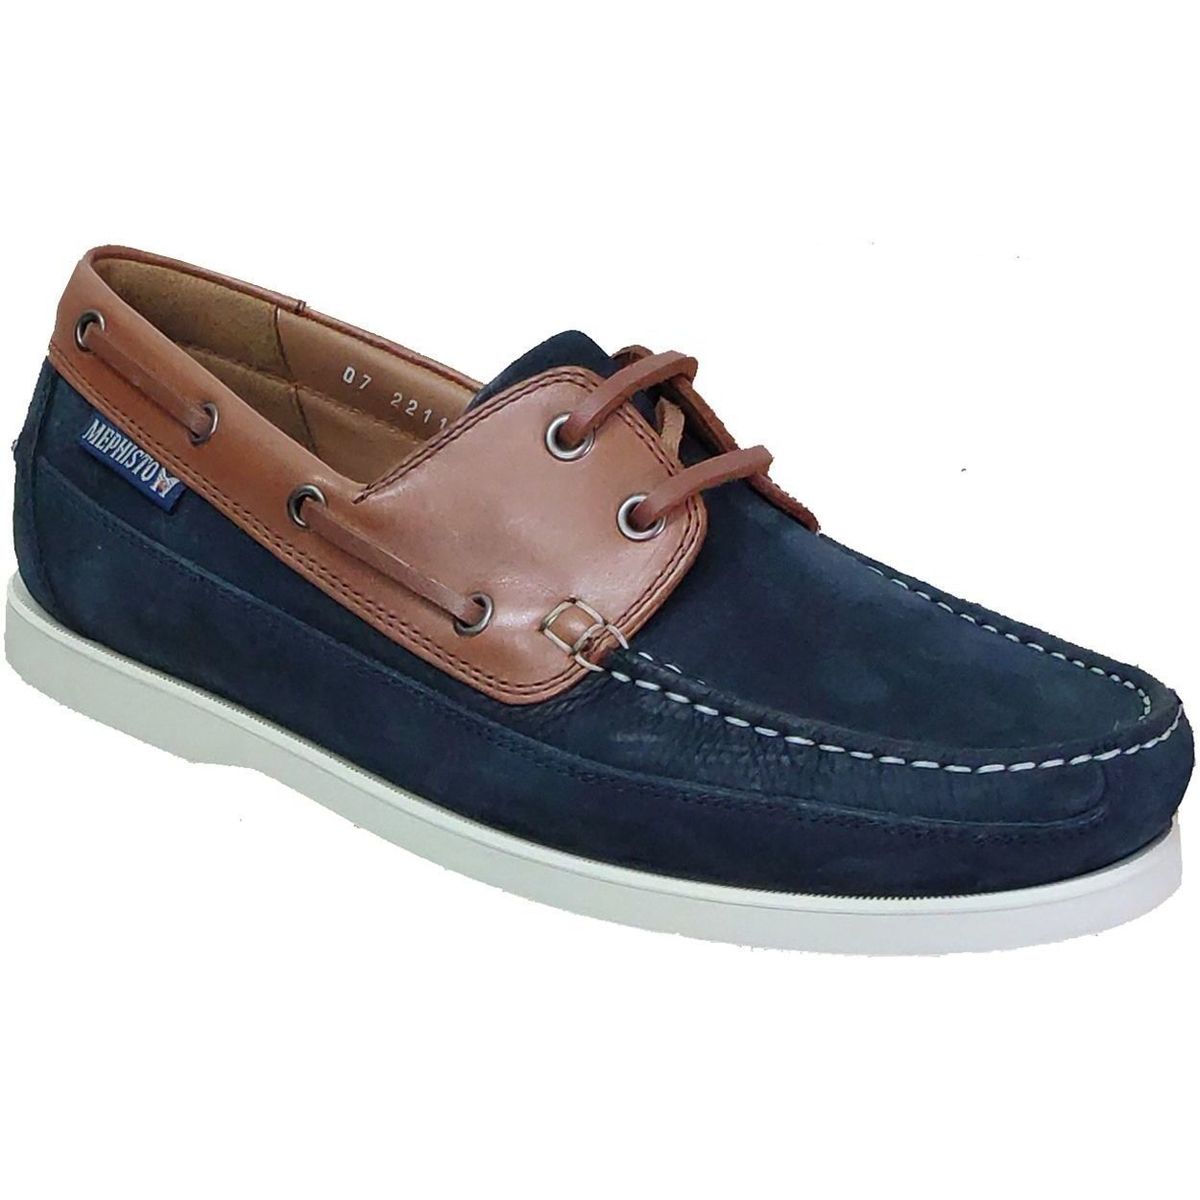 Boat shoes Mephisto BOATING